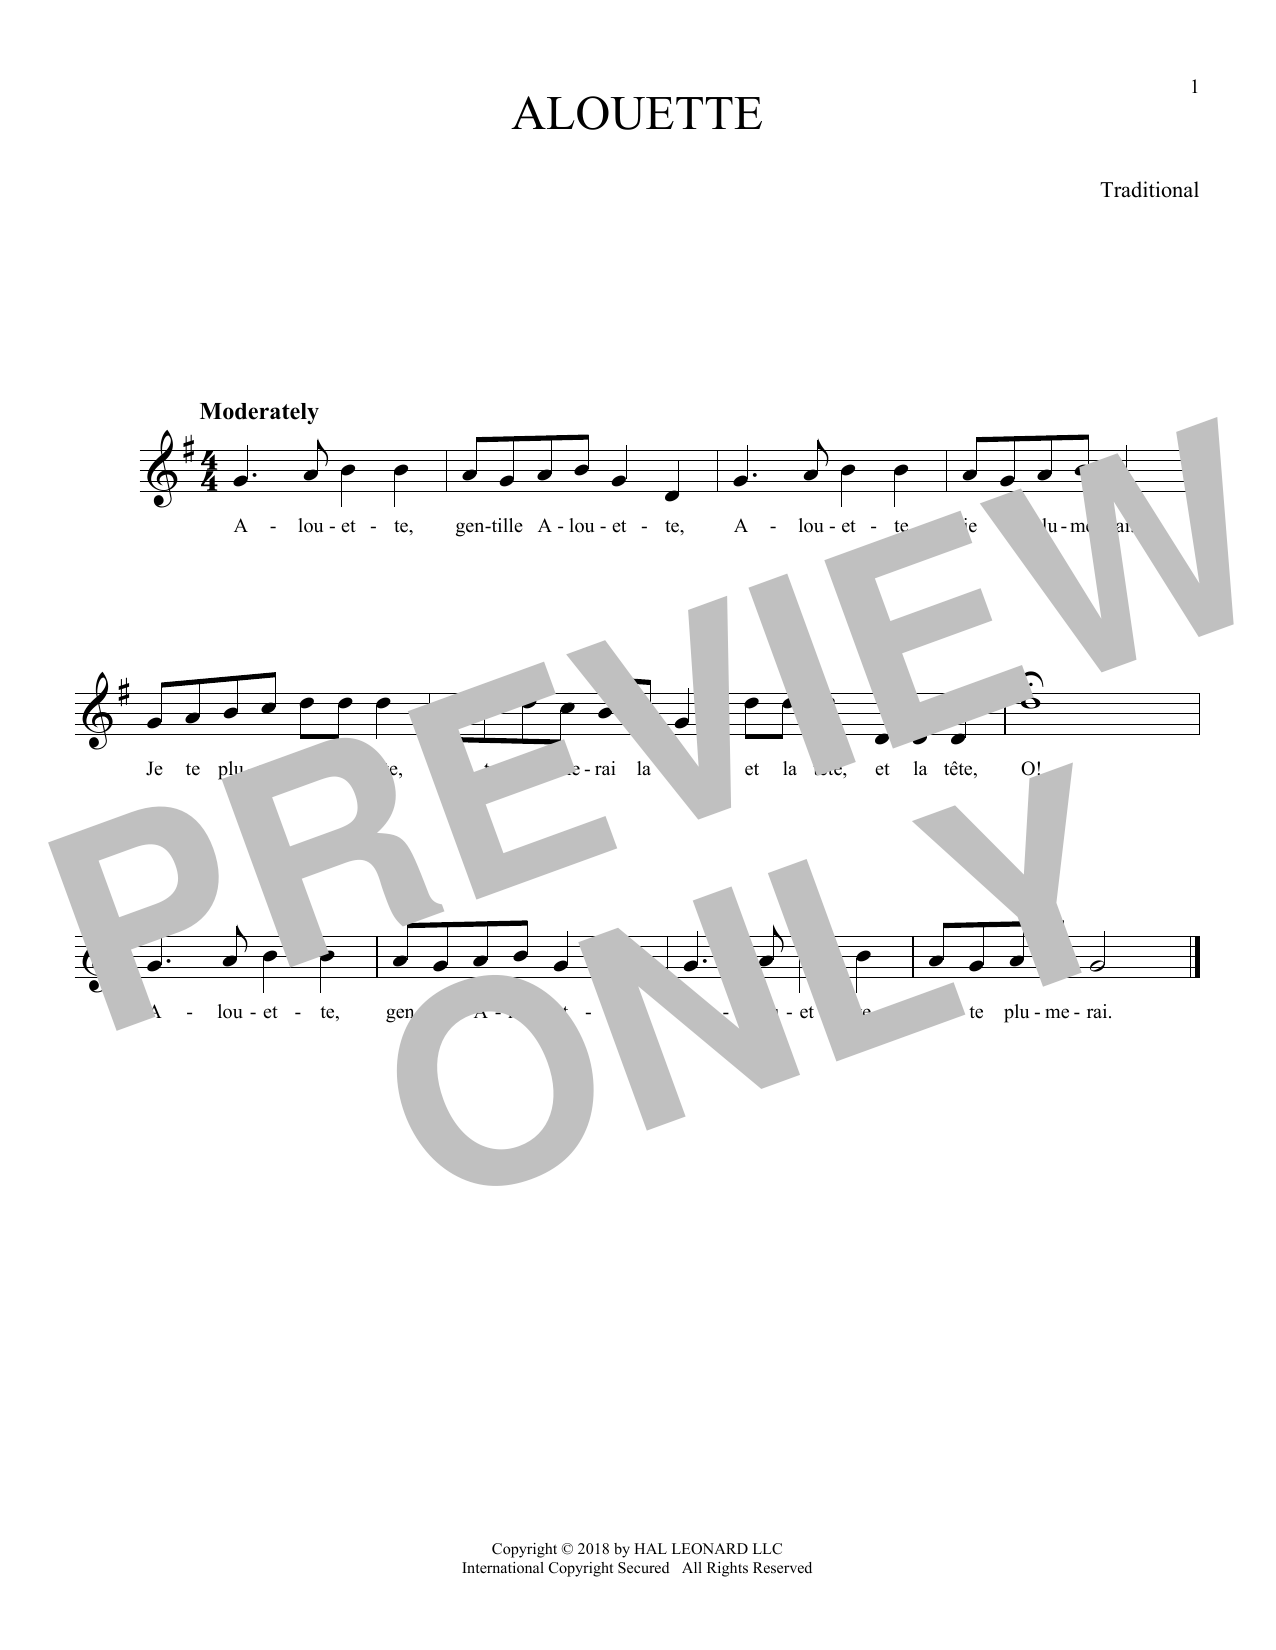 Download Traditional Alouette Sheet Music